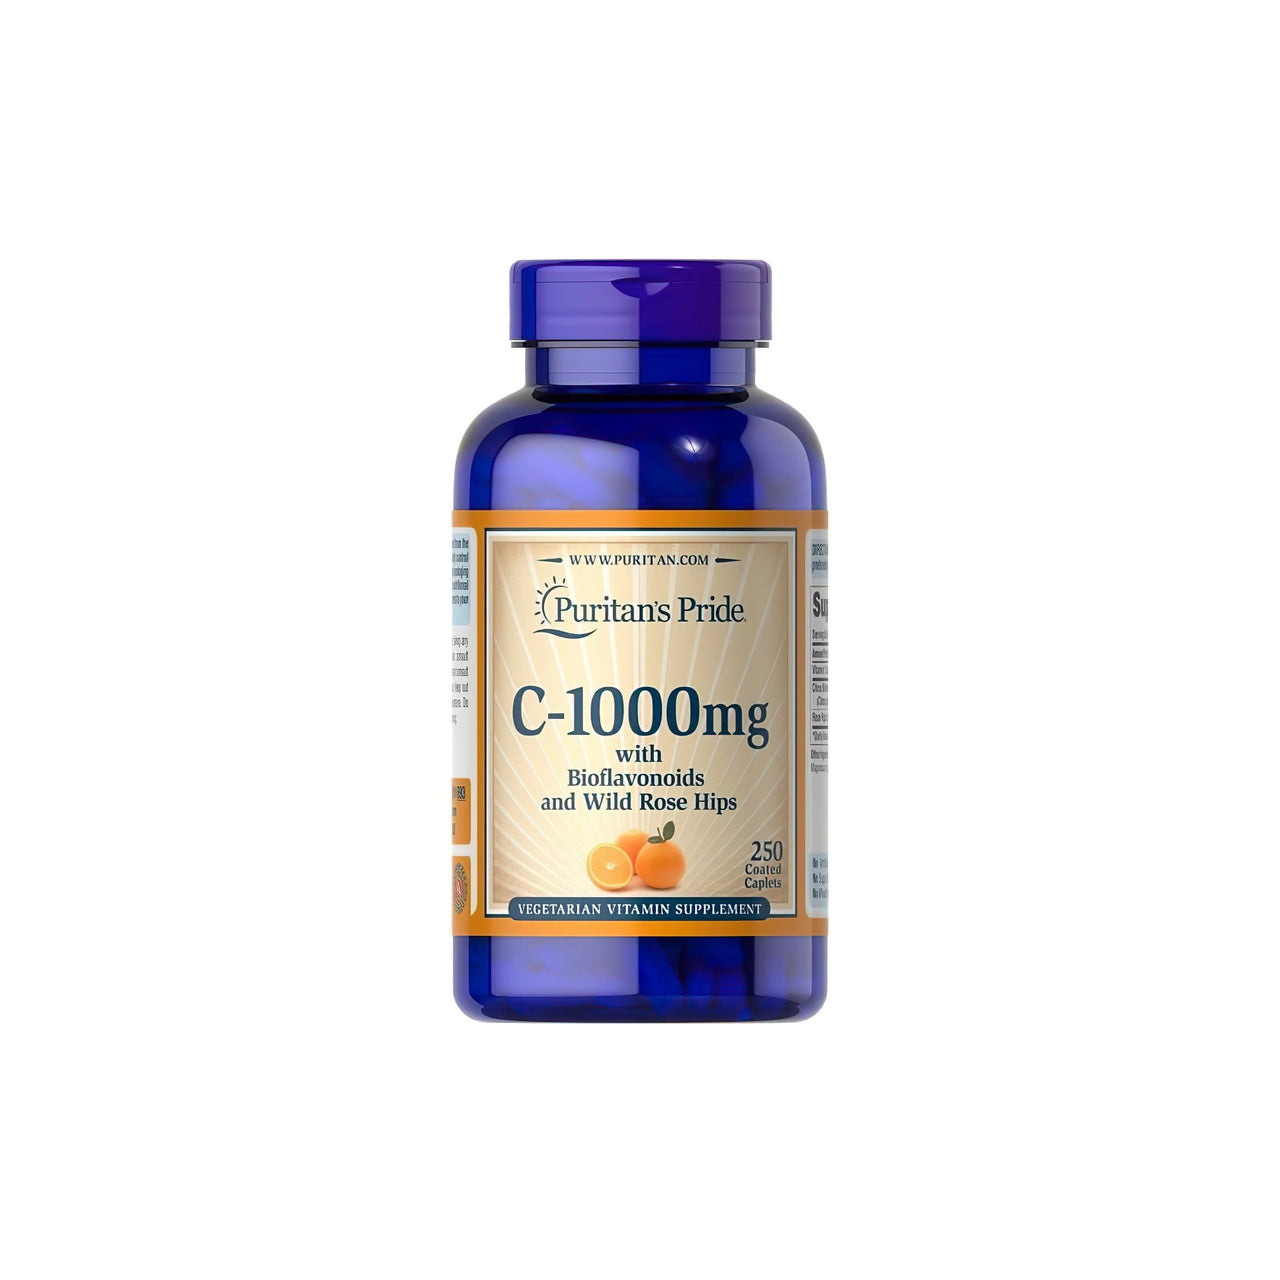 A bottle of Puritan's Pride Vitamin C-1000 mg with Bioflavonoids & Rose Hips 250 Caplets.